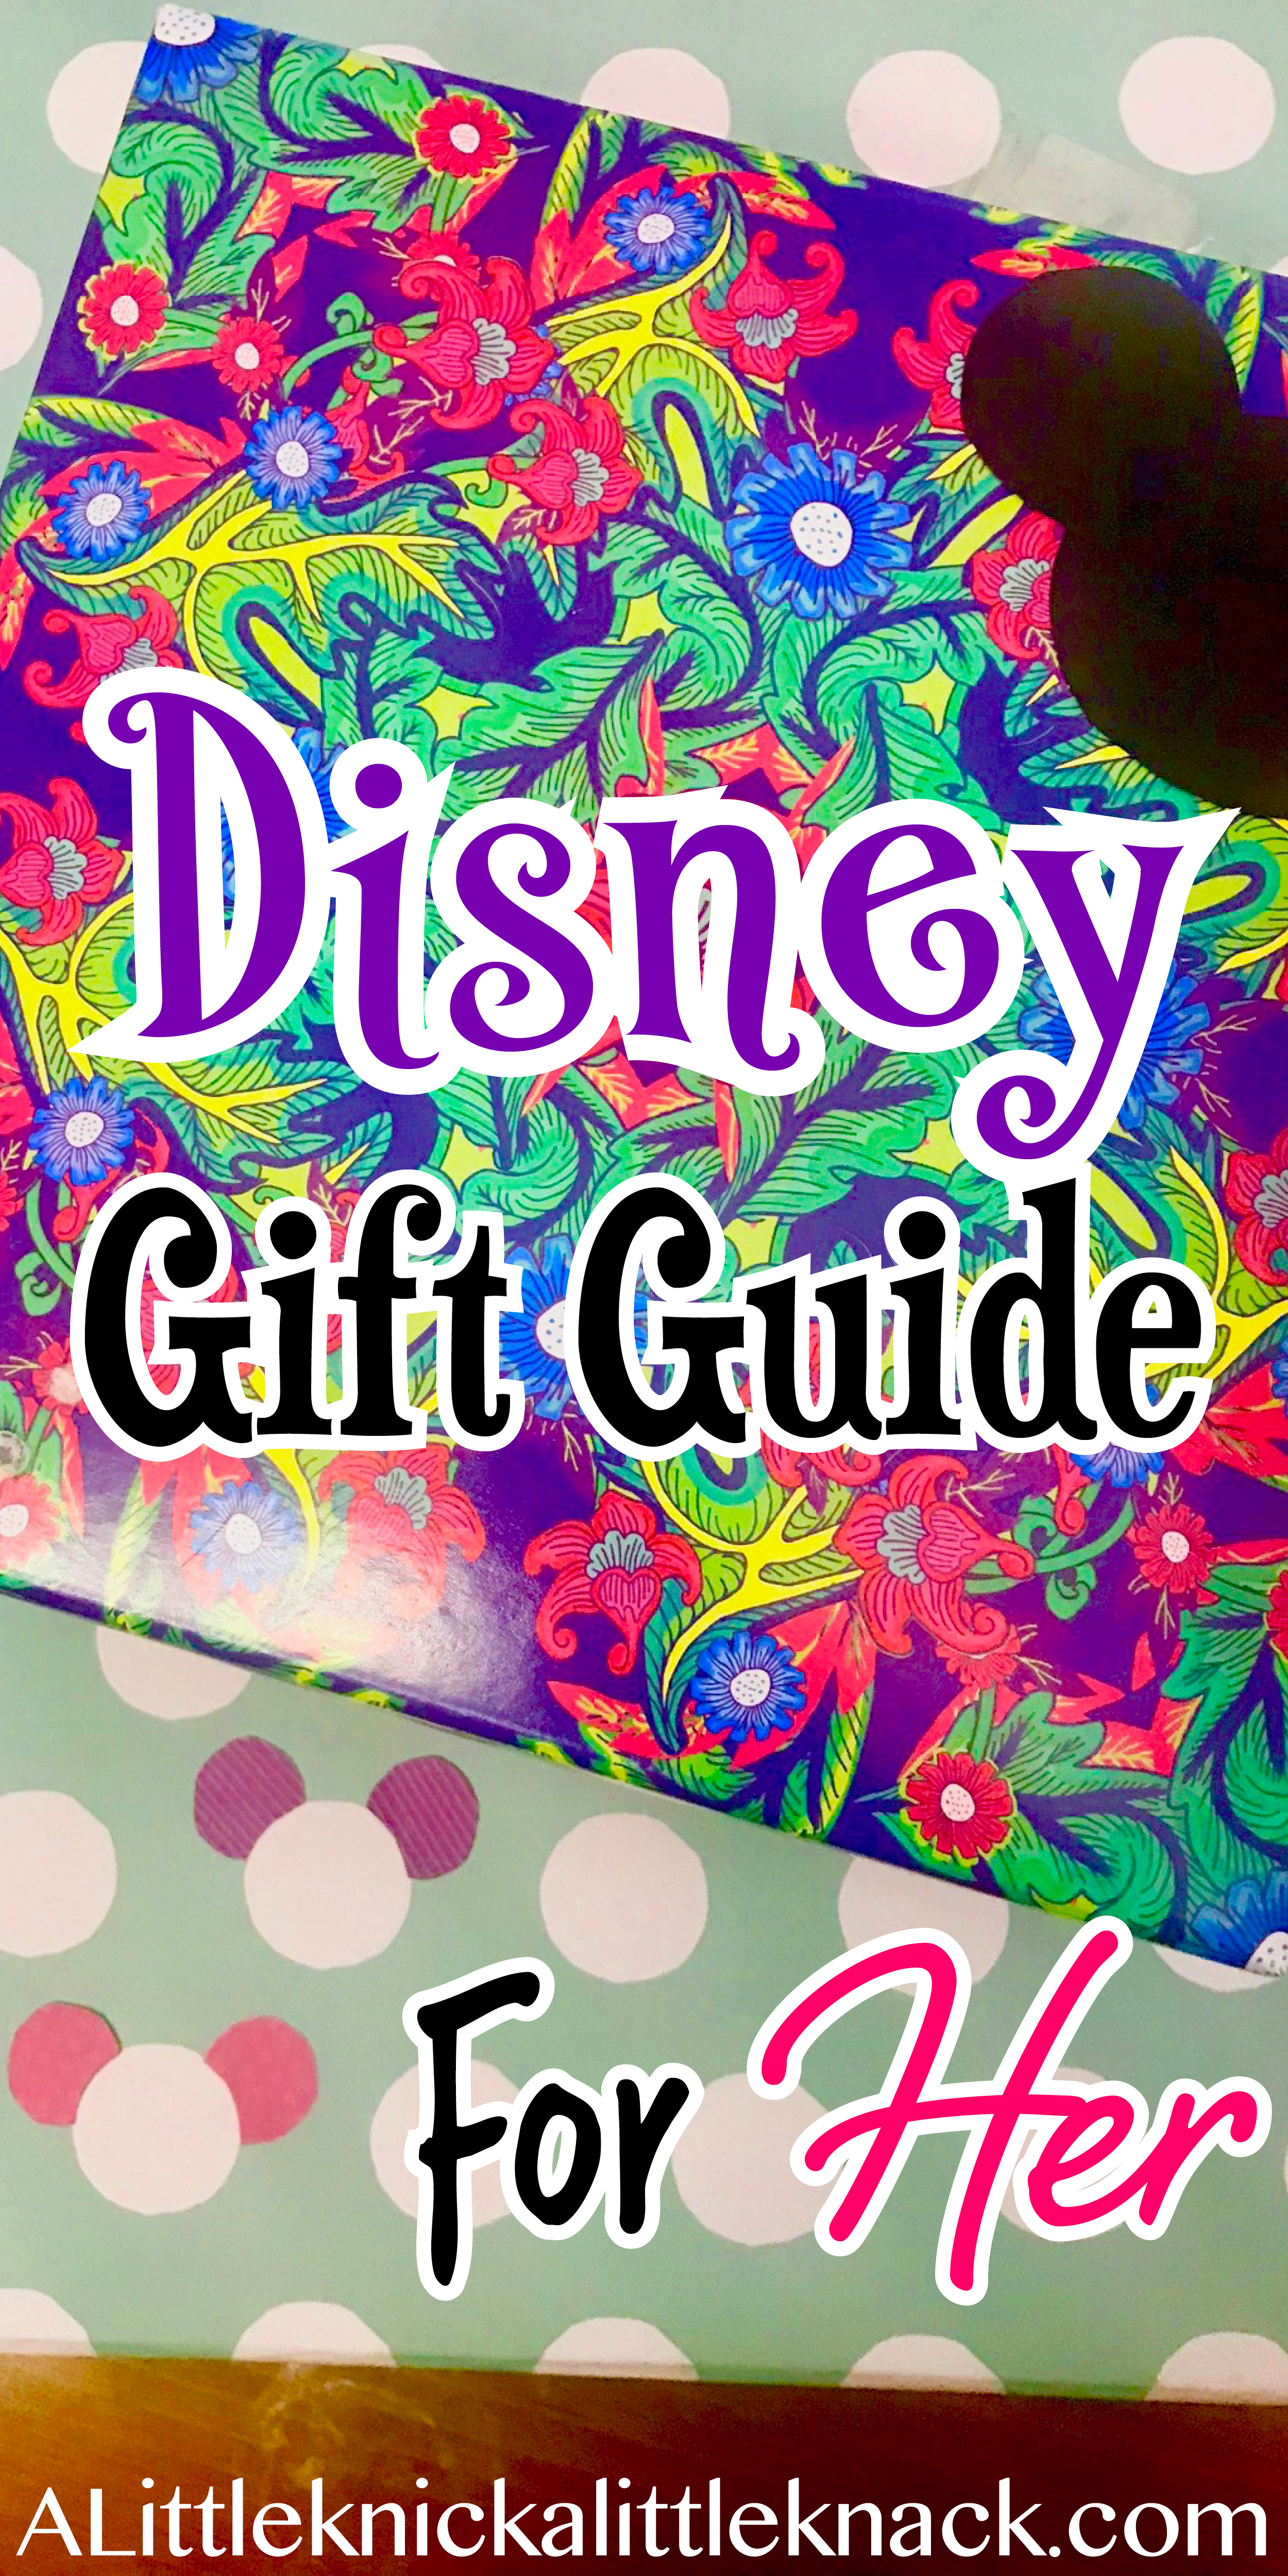 The ultimate Disney gift guide for her! From wallets to stocking stuffers this guide has it all. #Disneygirl